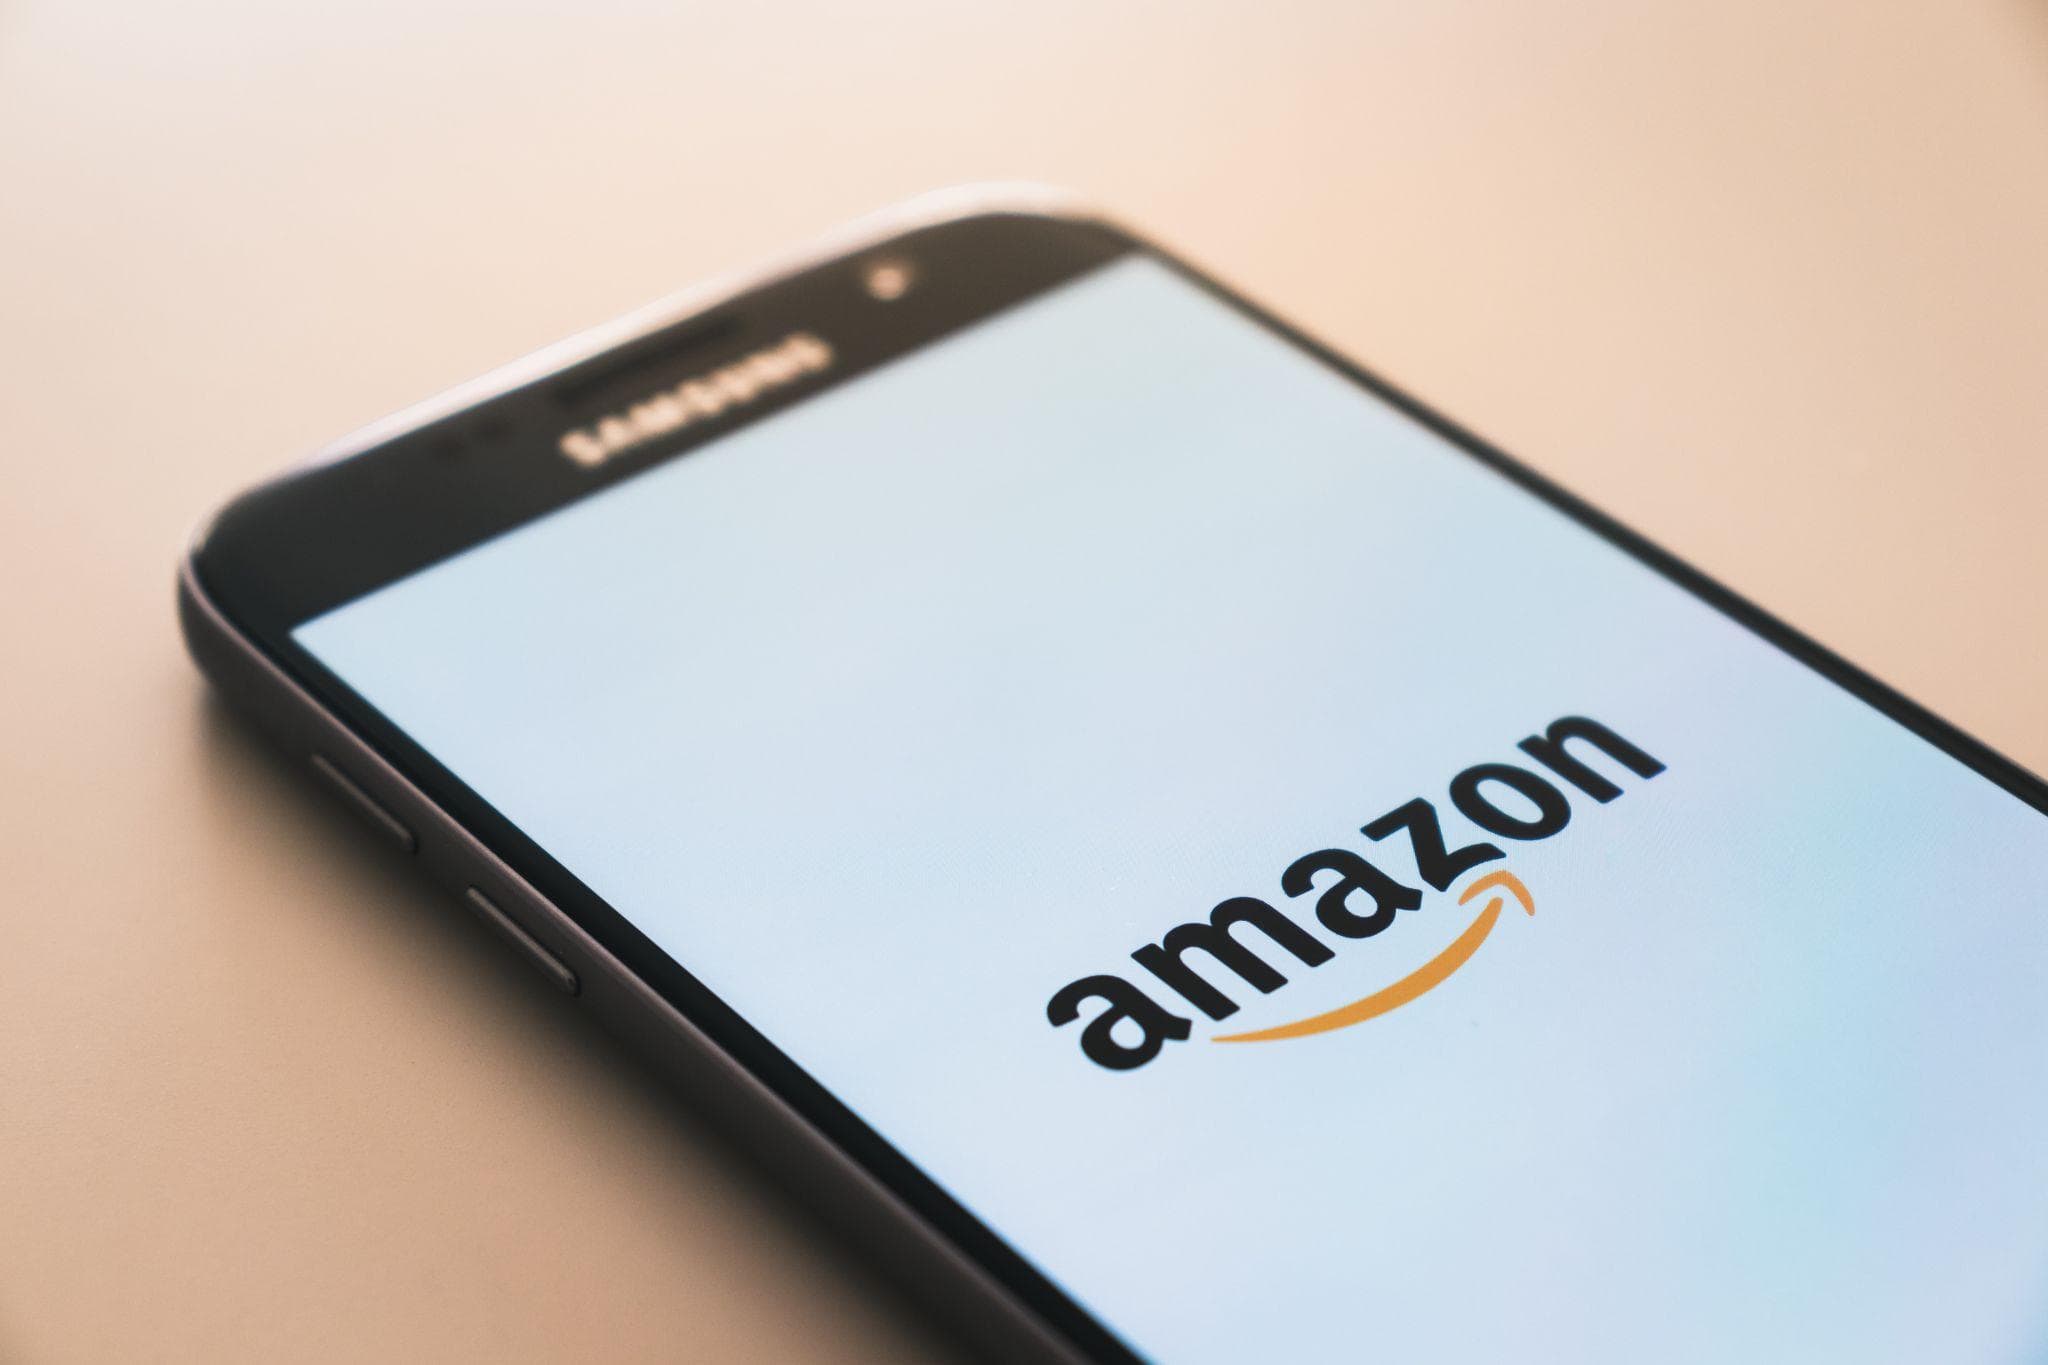 The Amazon logo on a mobile phone screen